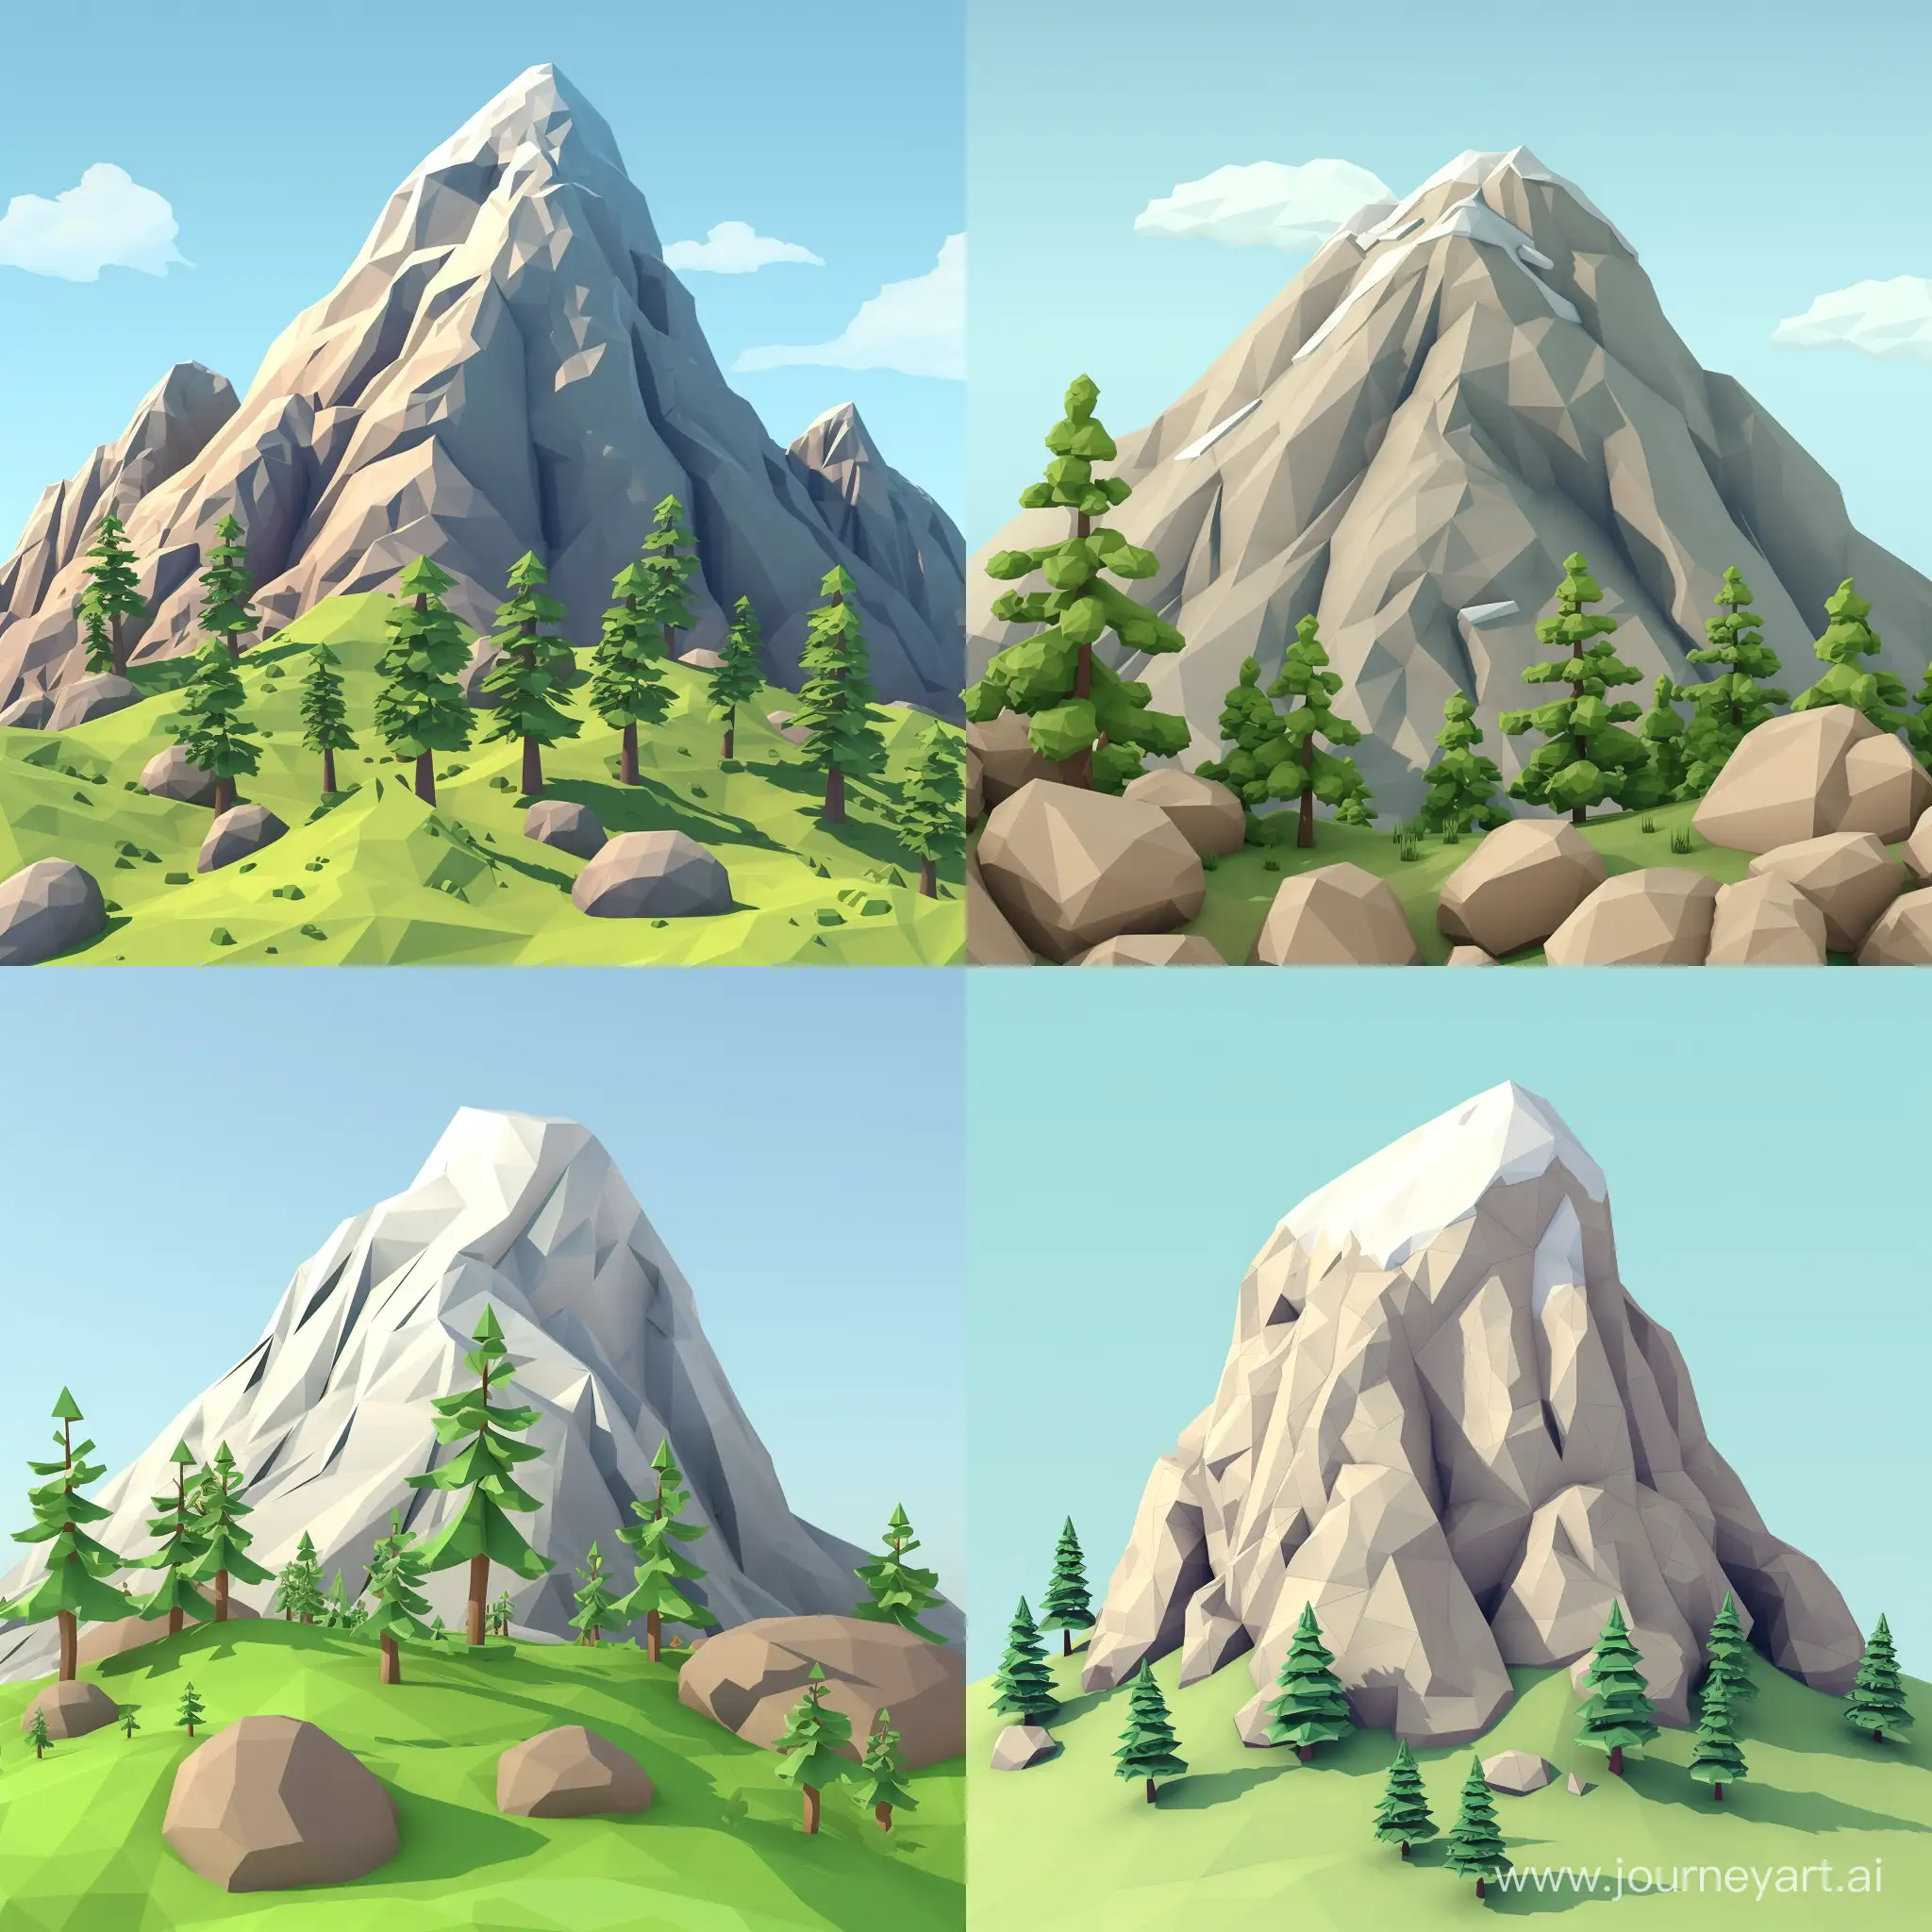 mountain in cartoon low poly style with trees

